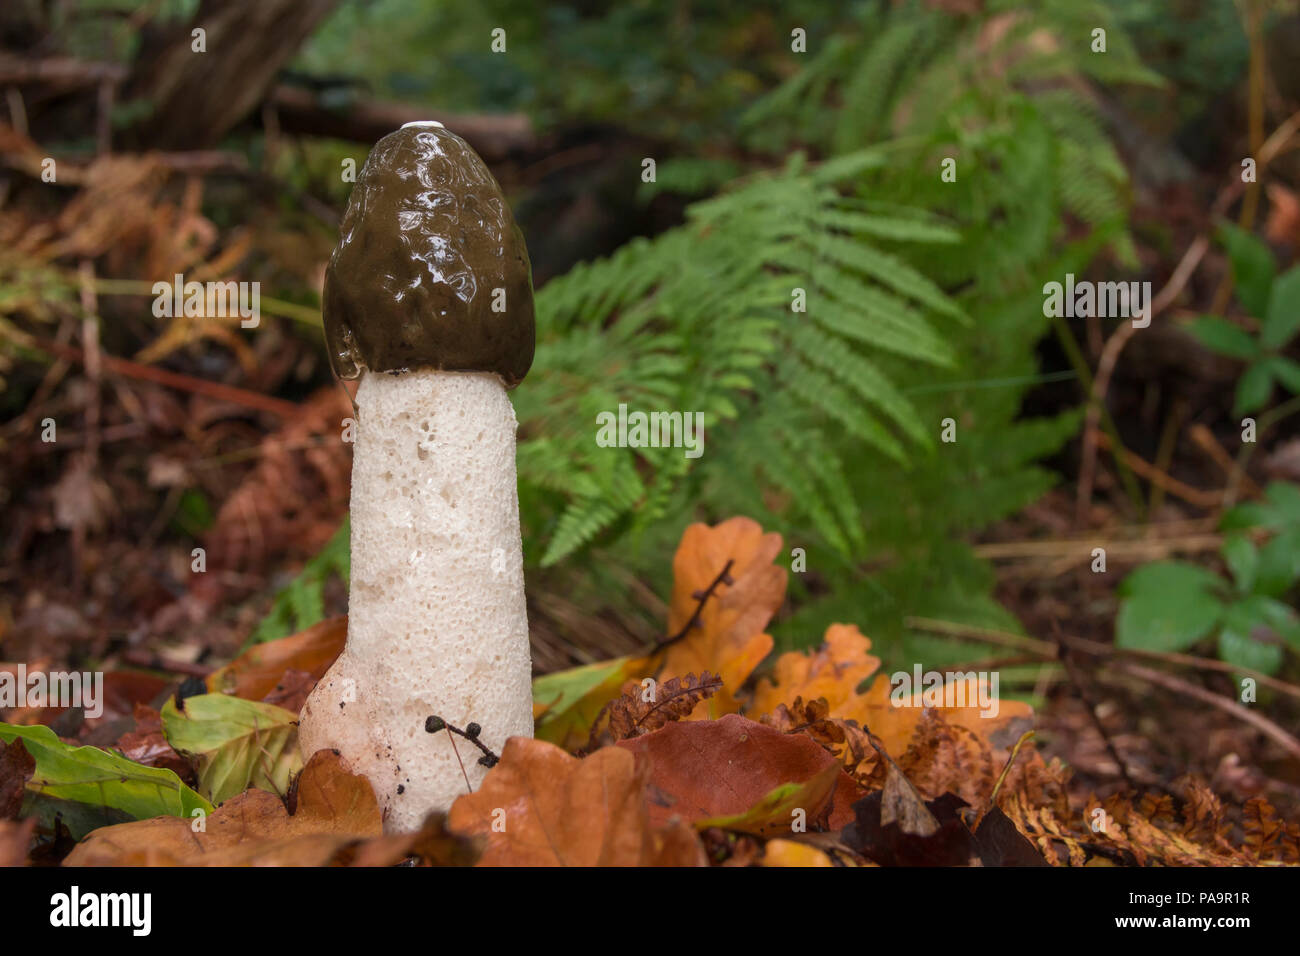 Common Stinkhorn, Phallus impudicus, growing in leaf-litter, early autumn in a Berkshire woodland. Stock Photo